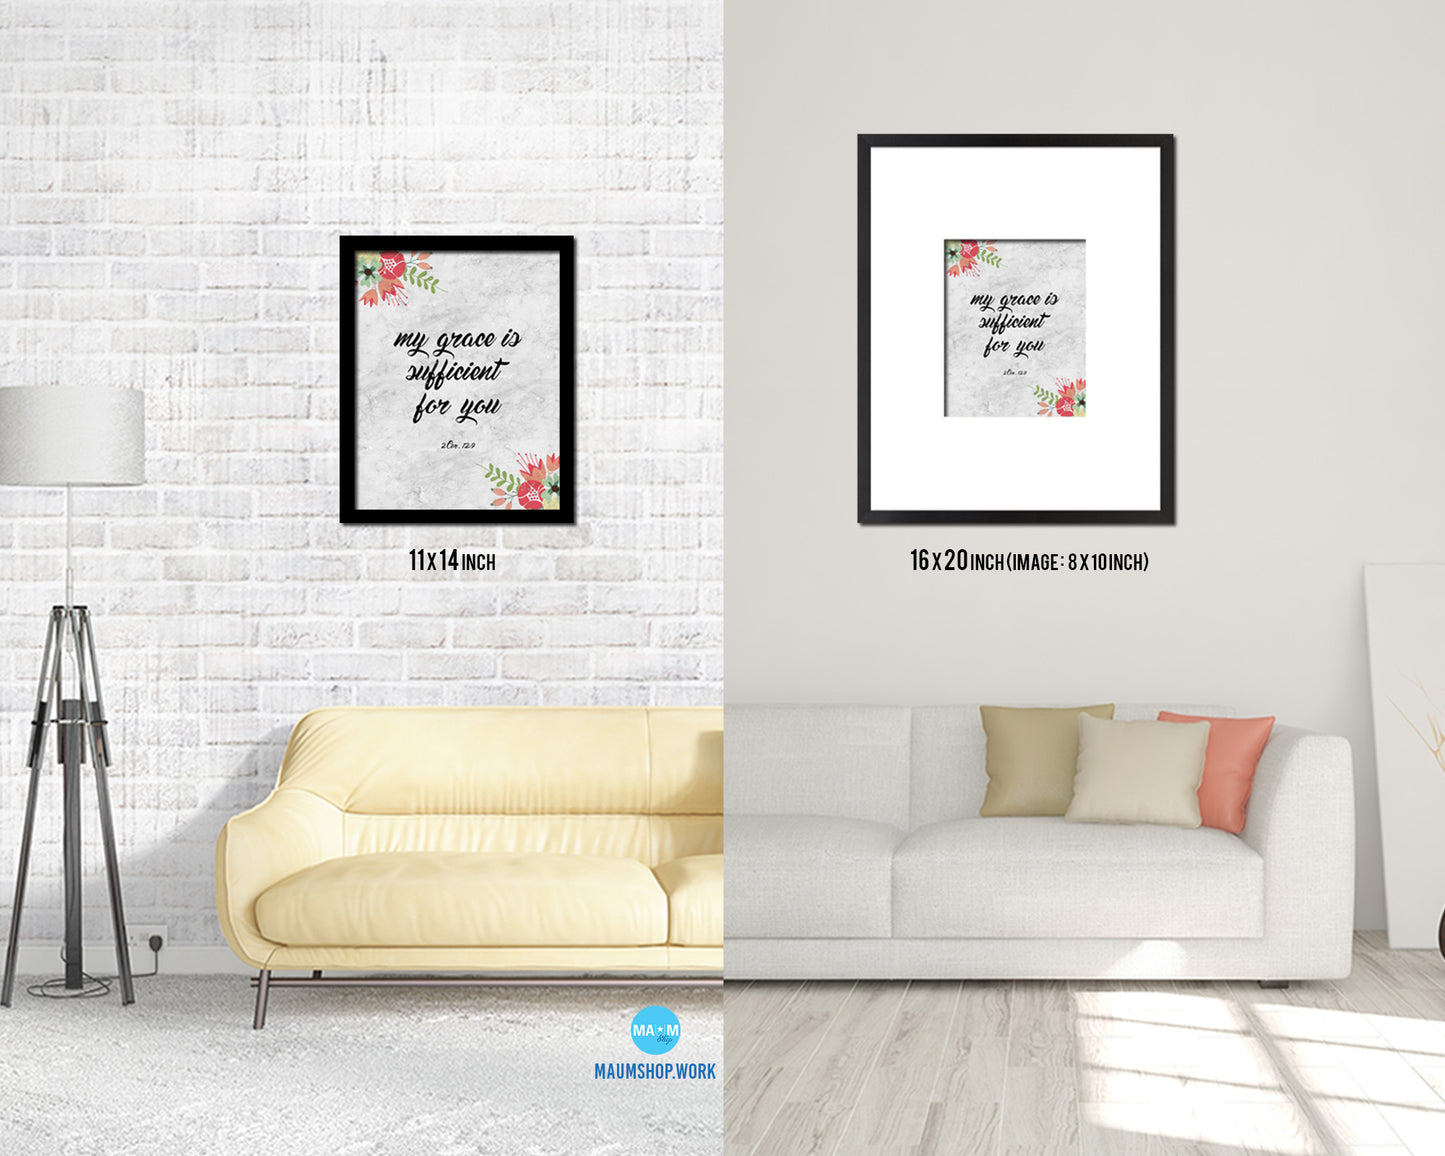 My grace is sufficient for you, 2 Corinthians 12:9 Bible Scripture Verse Framed Print Wall Art Decor Gifts